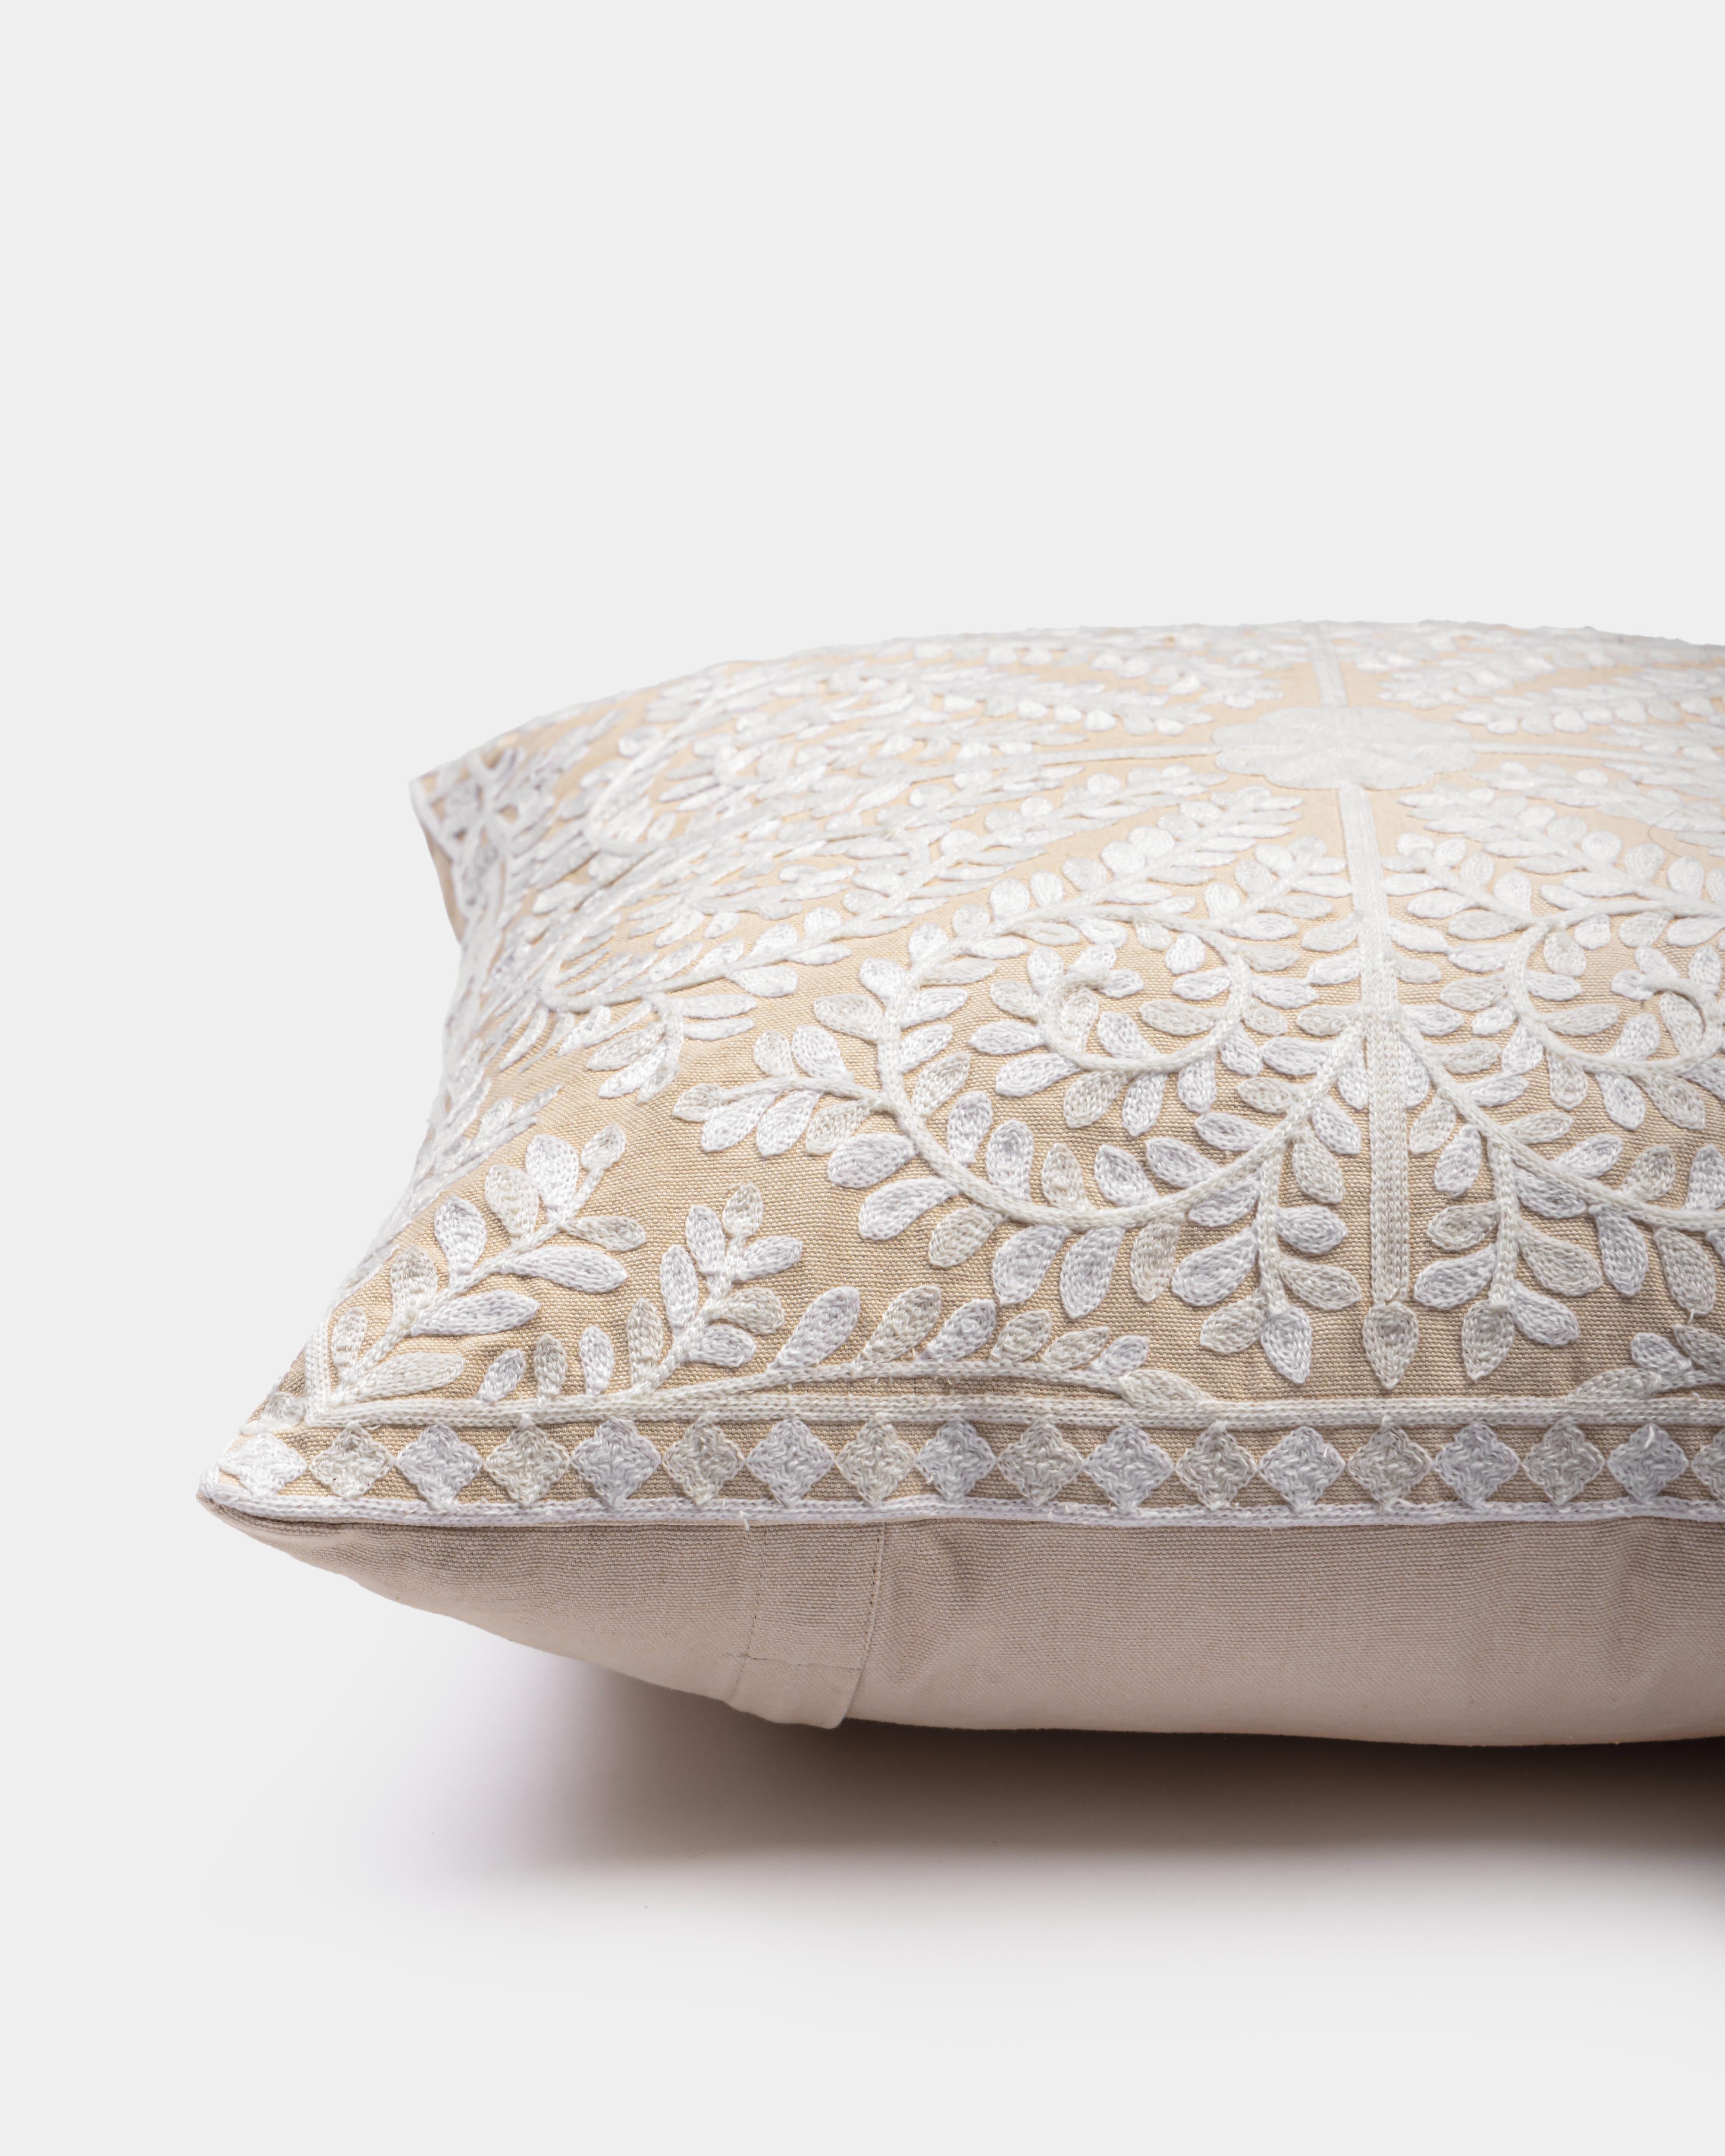 Suzani Pillow | Ivory Pillow Cover Foliage 18x18" | Made in Jaipur